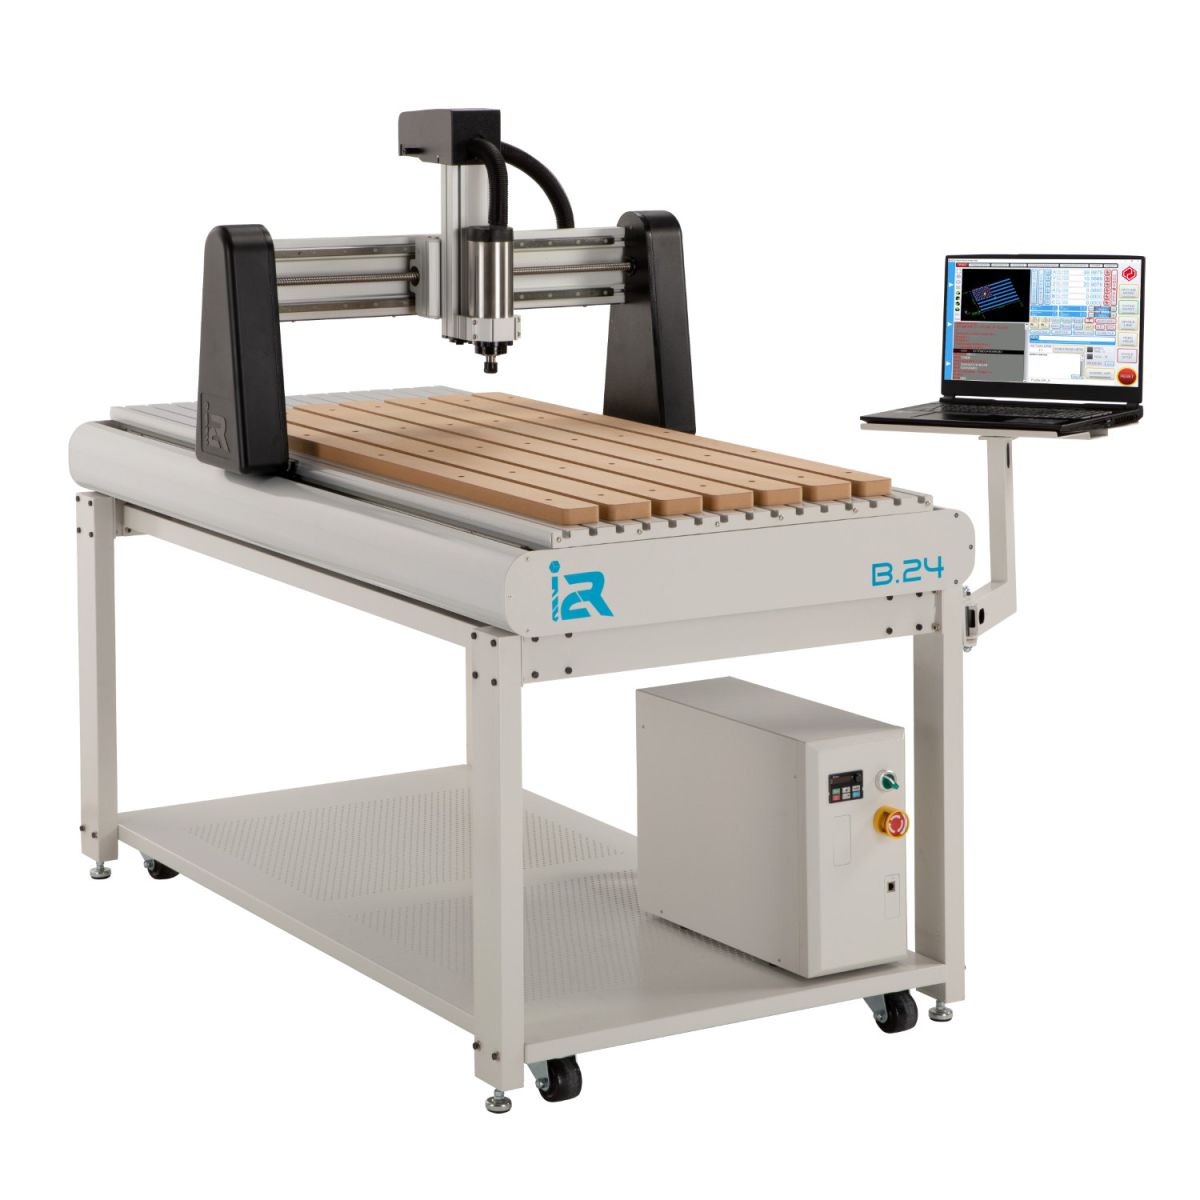 i2rb623 cnc router uccnc ready 915mm x 610mm 15kw spindle er16 included tw 8459611000